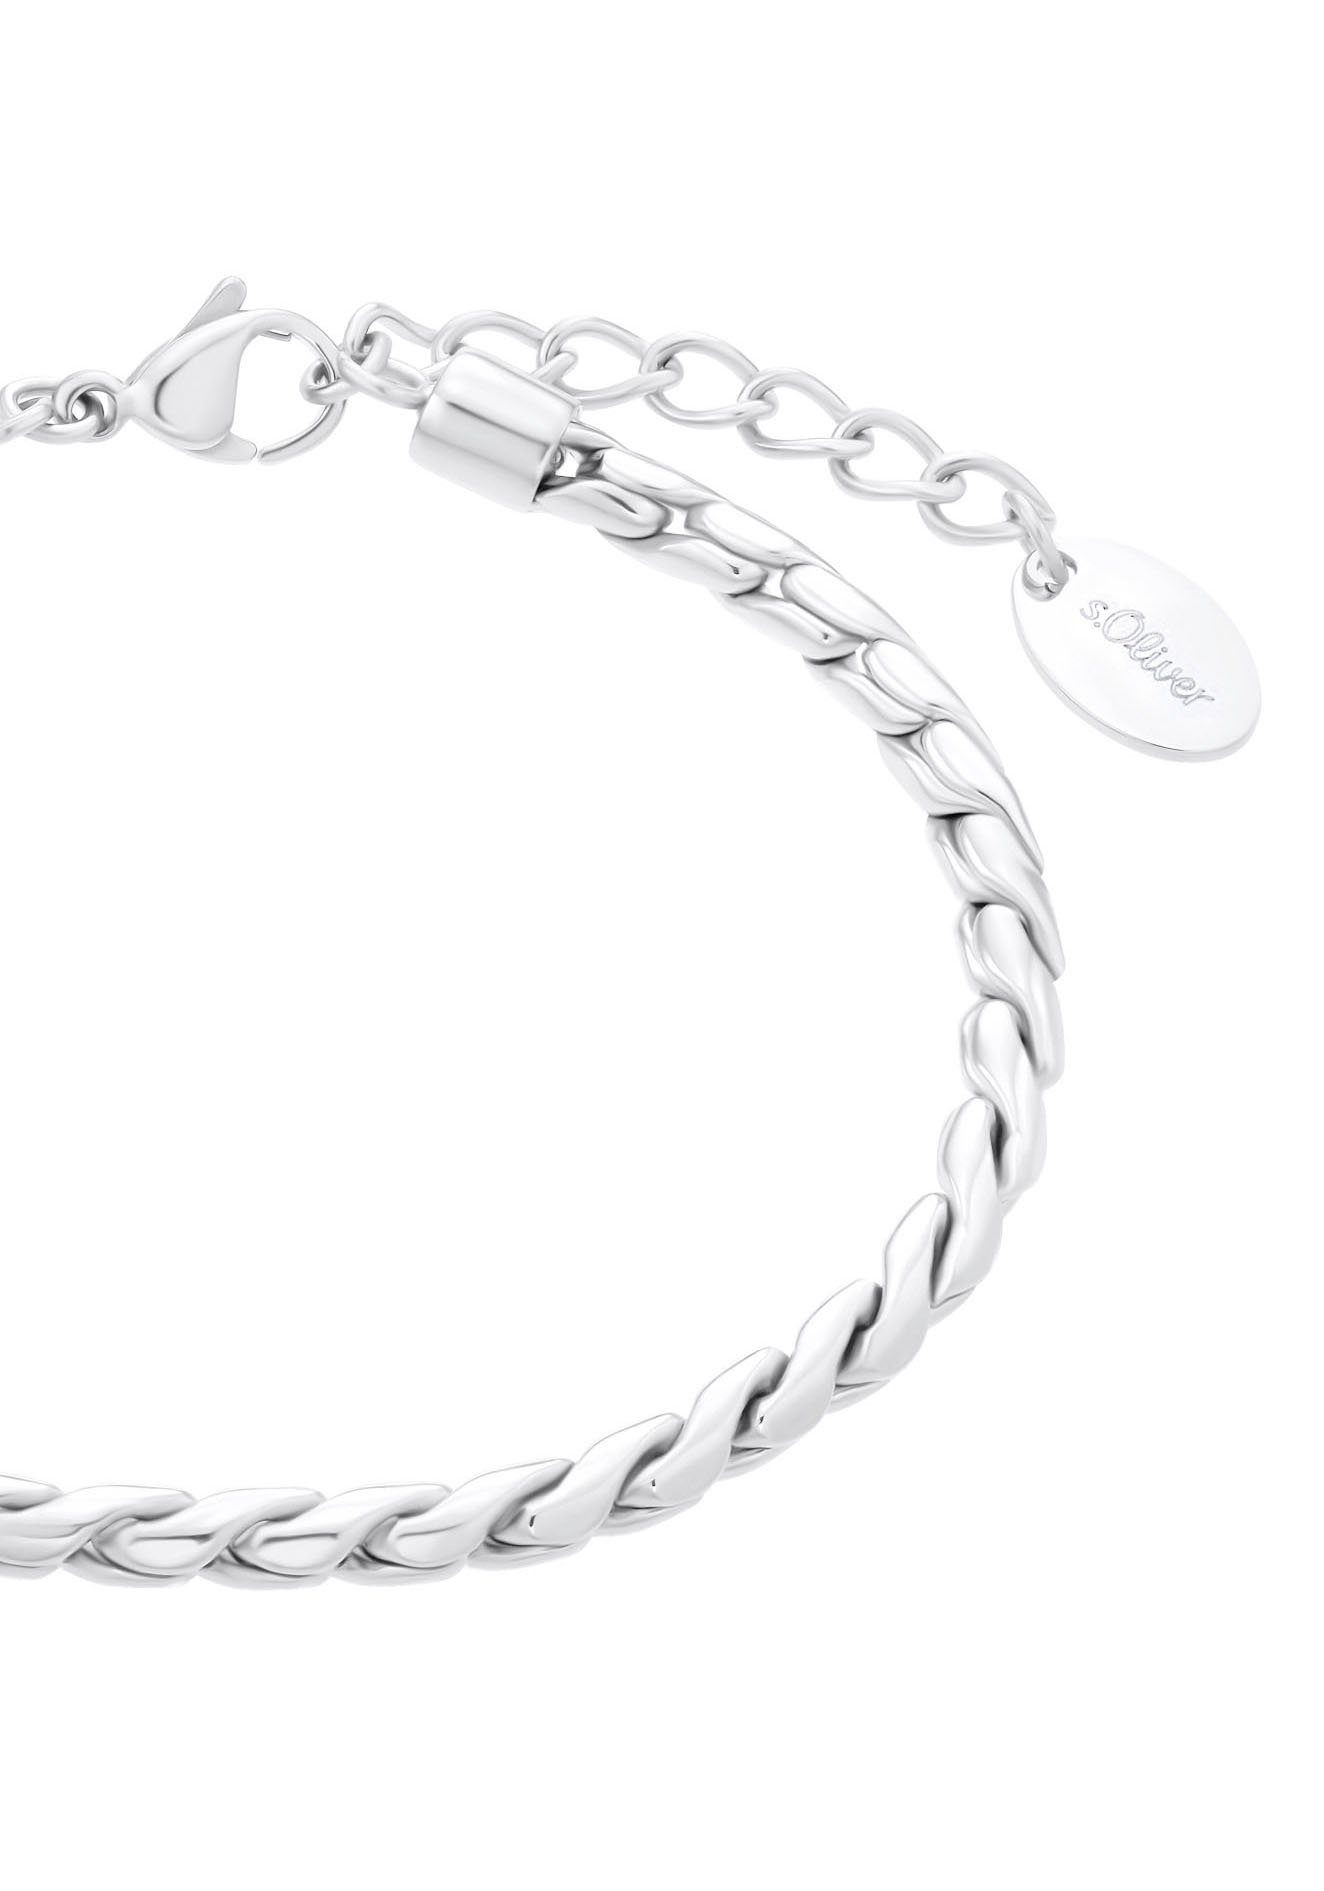 s.oliver armband classic chic, 2035762, 2035763 zilver